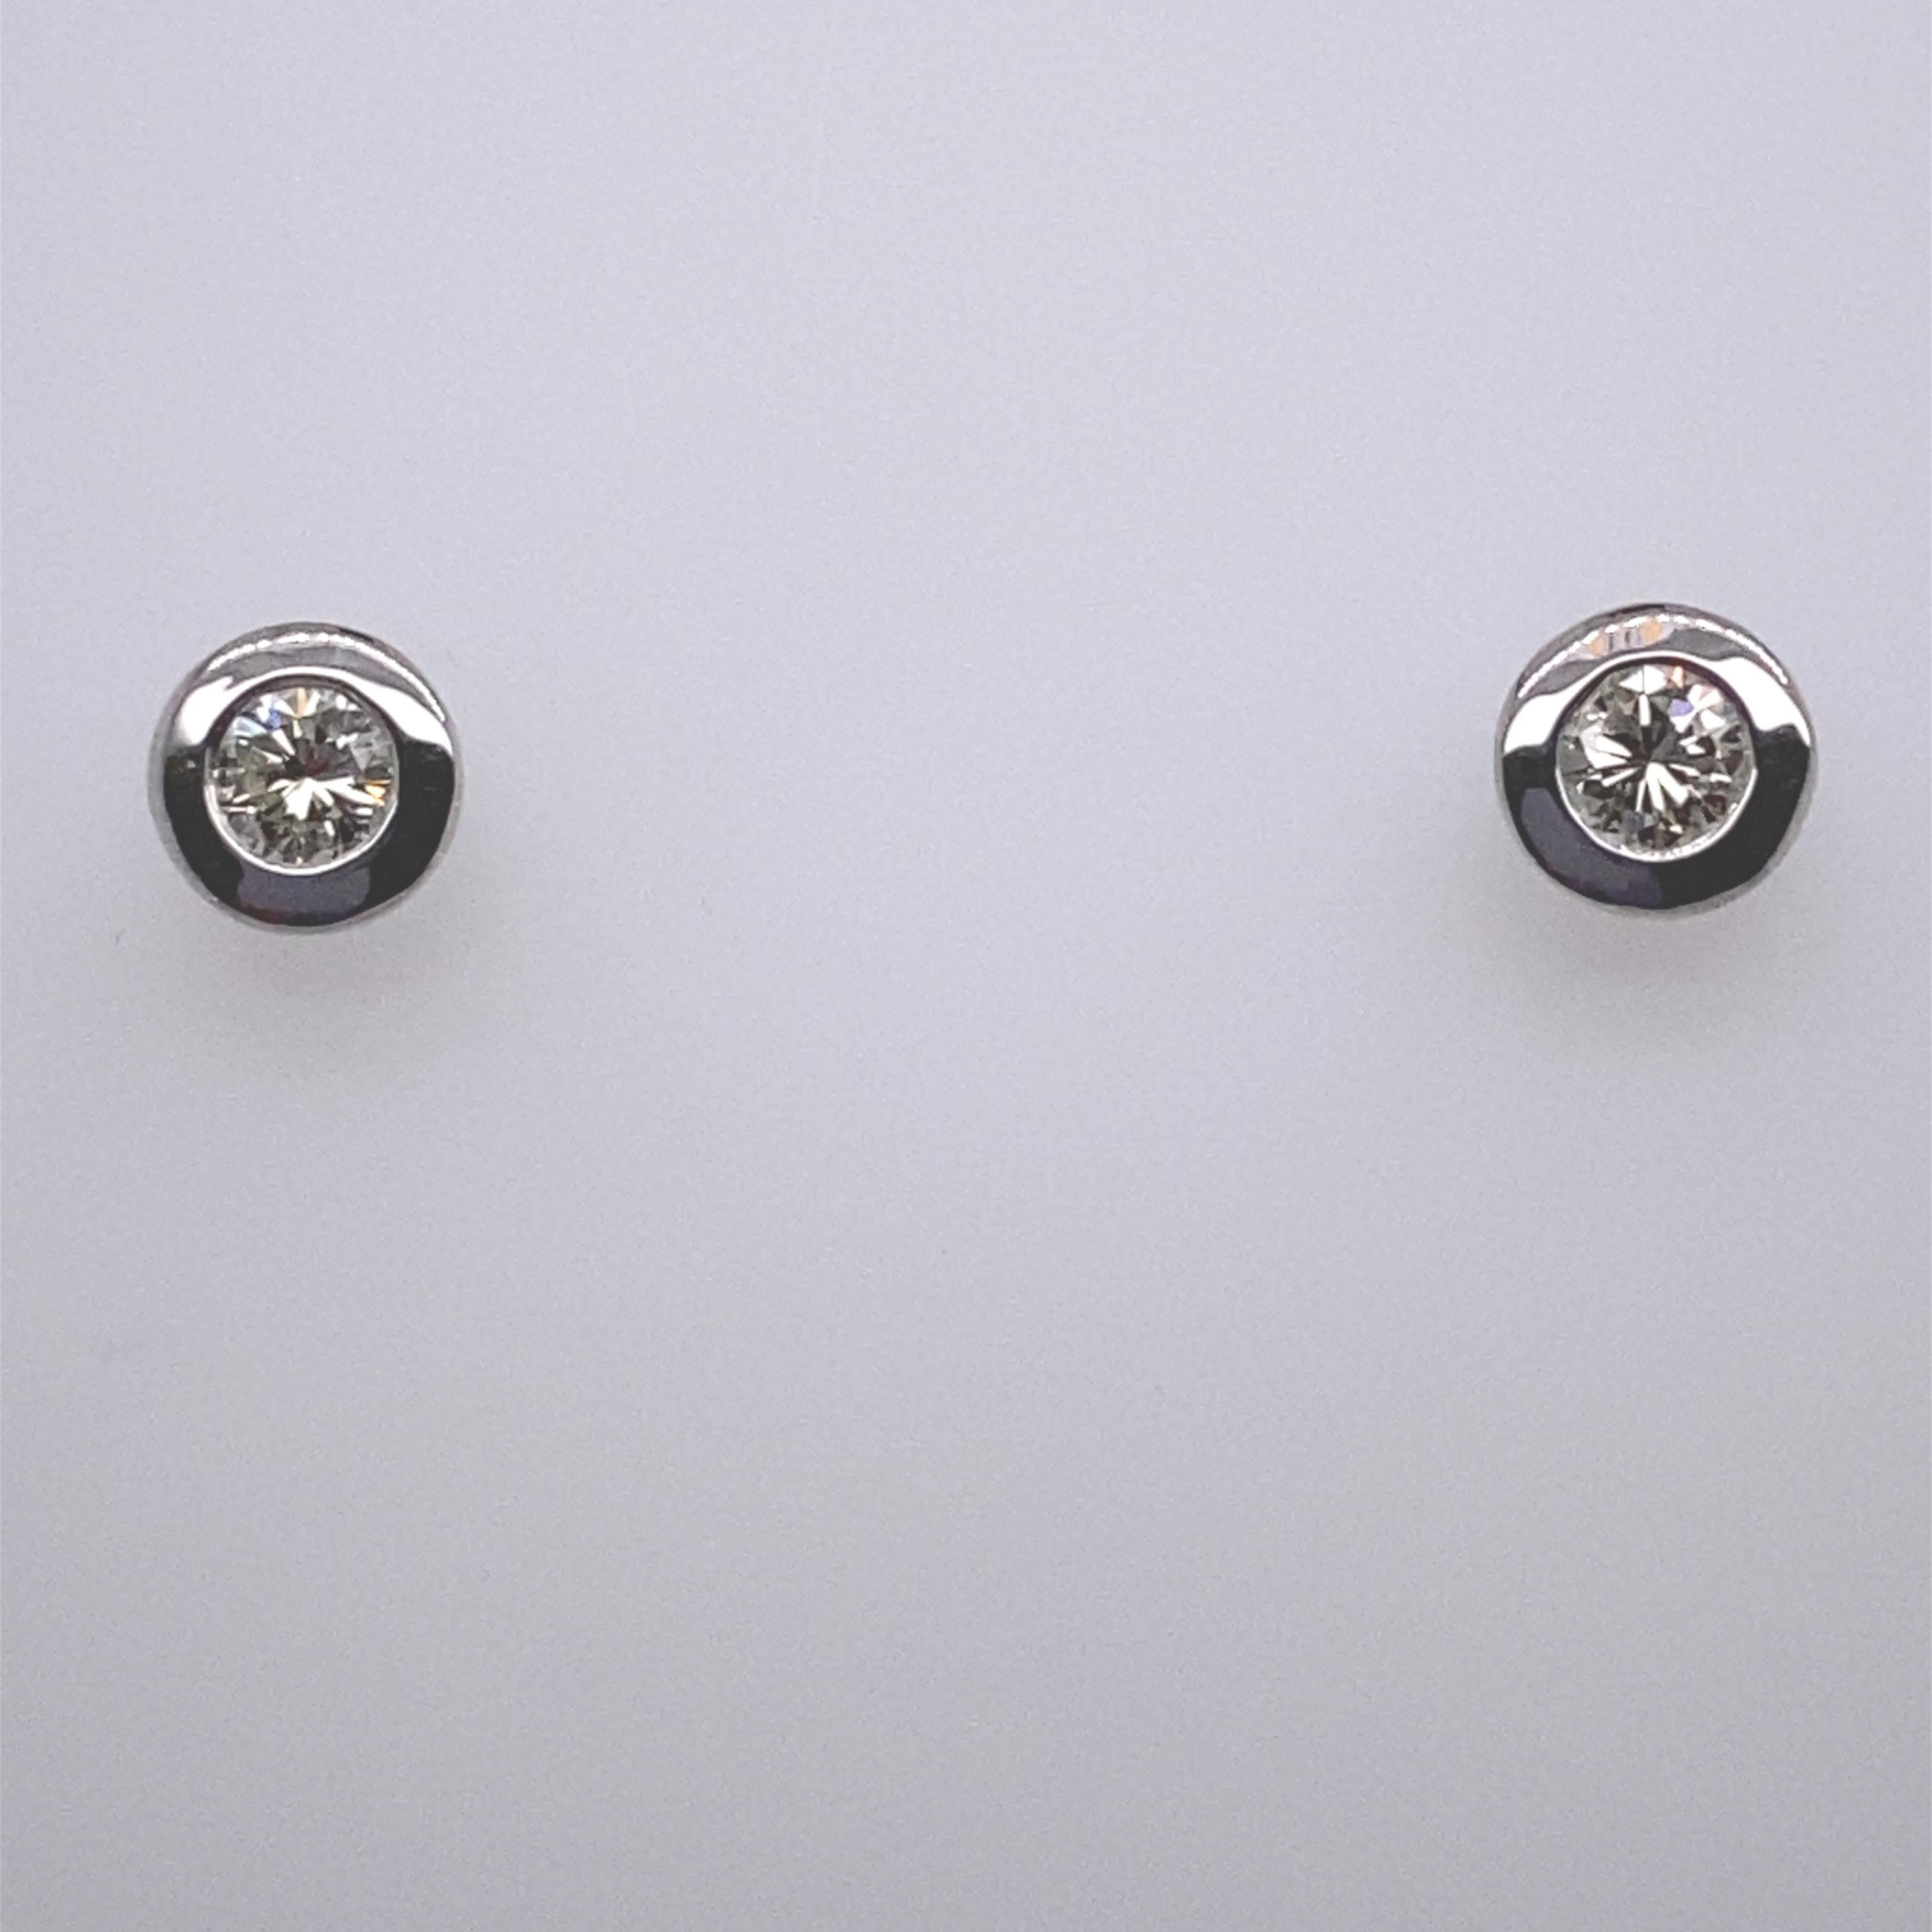 0.24ct Diamond Studs Earrings in Rubover Setting in 18ct White Gold In New Condition For Sale In London, GB